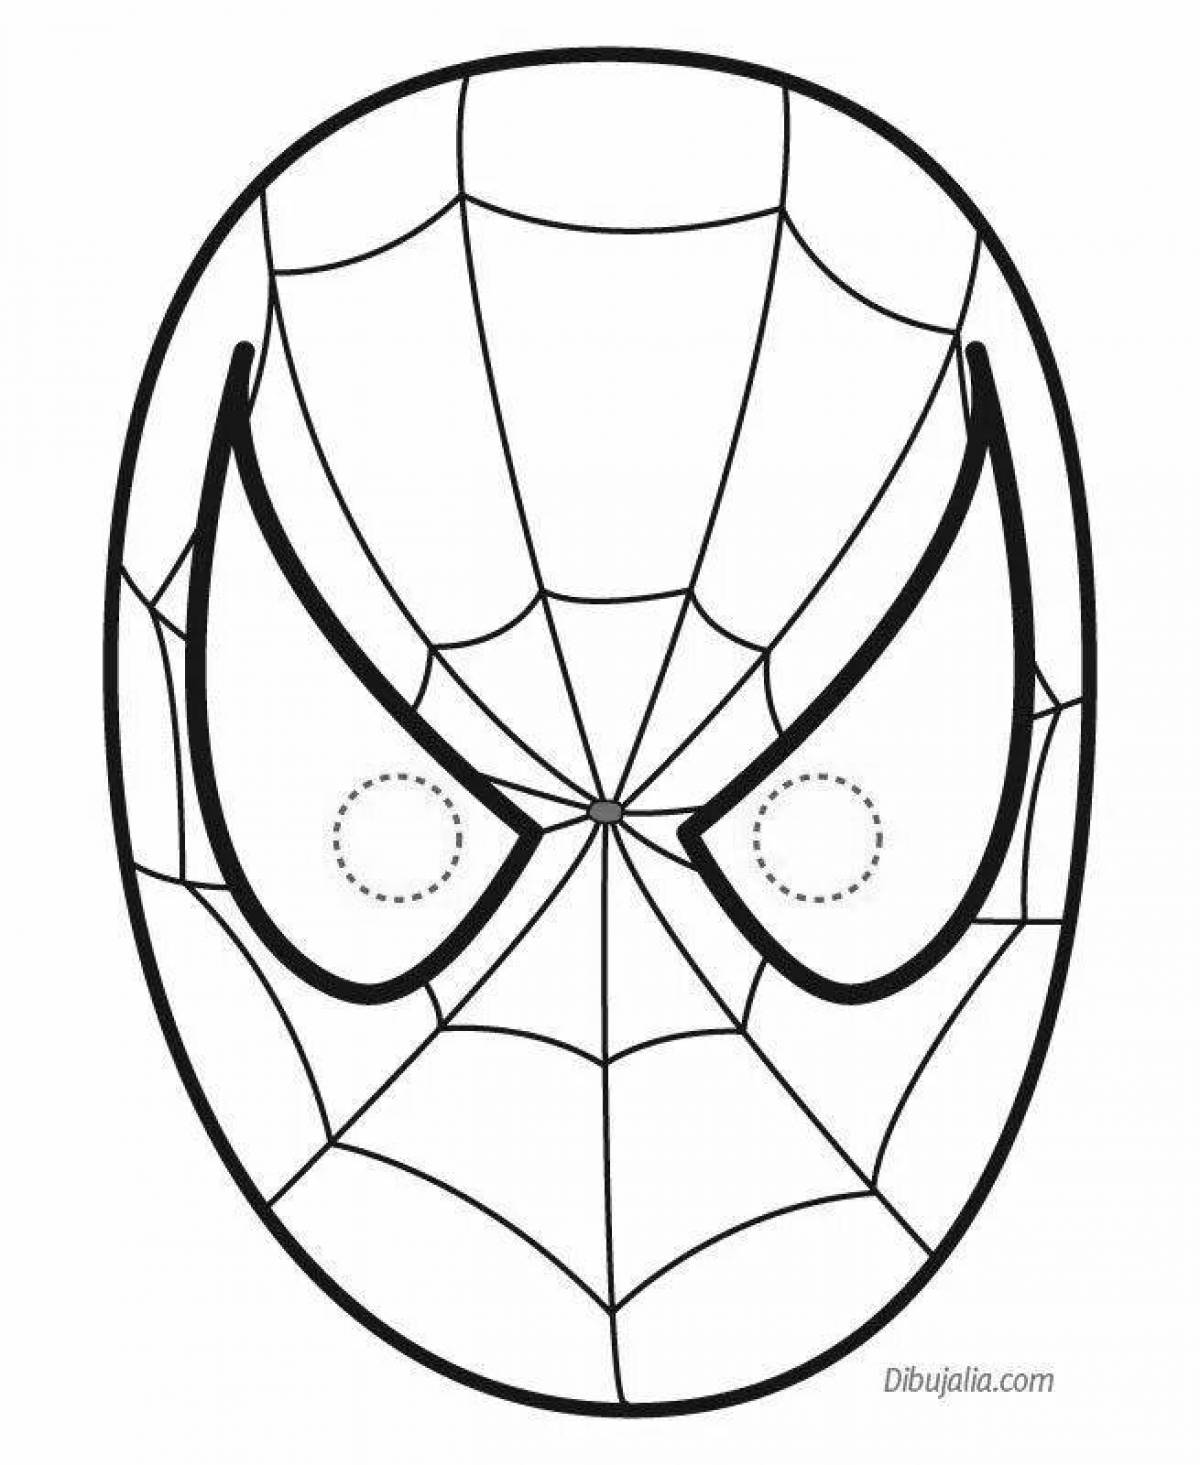 Spiderman live mask coloring page